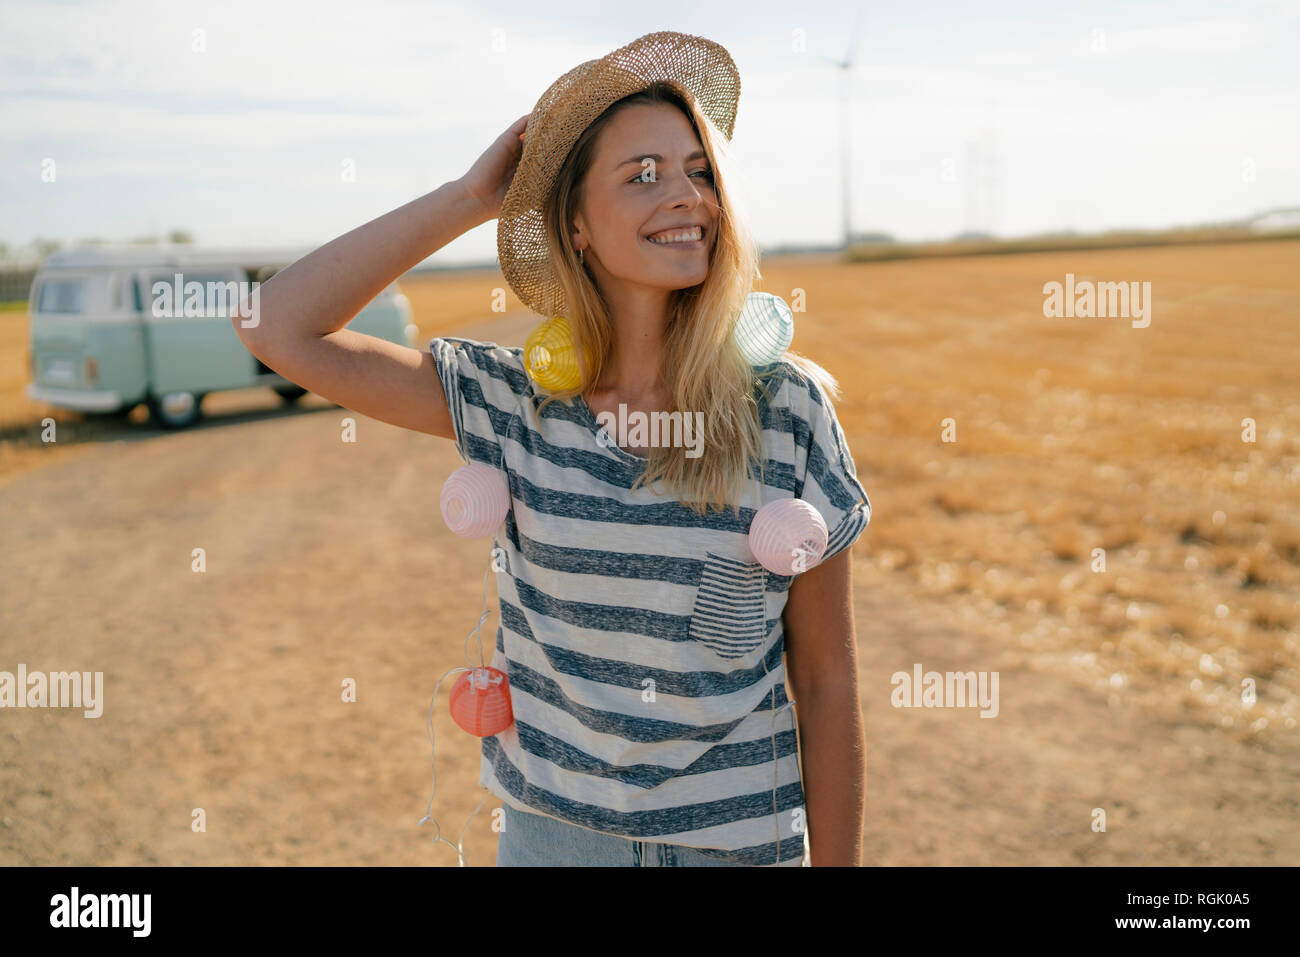 Happy young woman at camper van in rural landscape Stock Photo